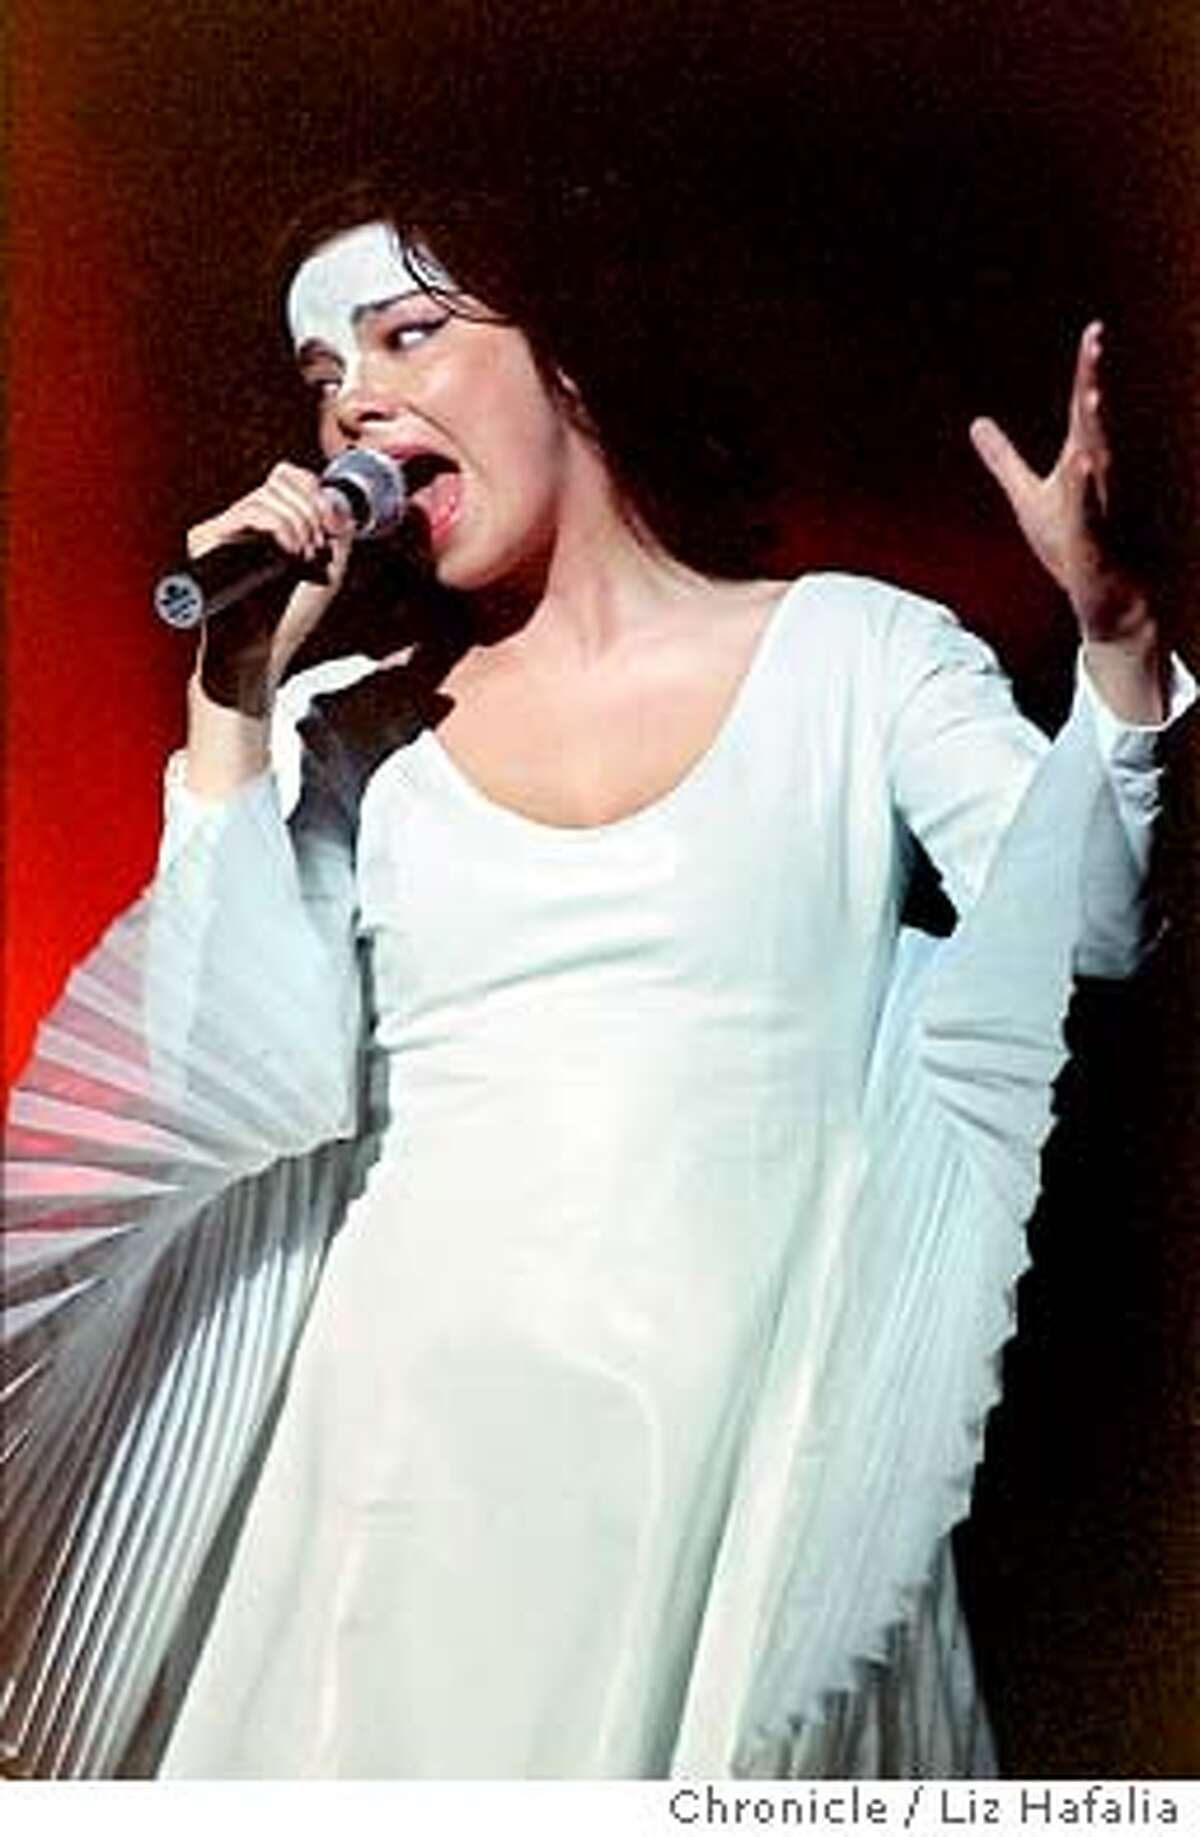 BJORK/C/21MAY98/DD/LH--Icelandic singer, Bjork at the Warfield Theater in SF. Photo by Liz Hafalia /The Chronicle